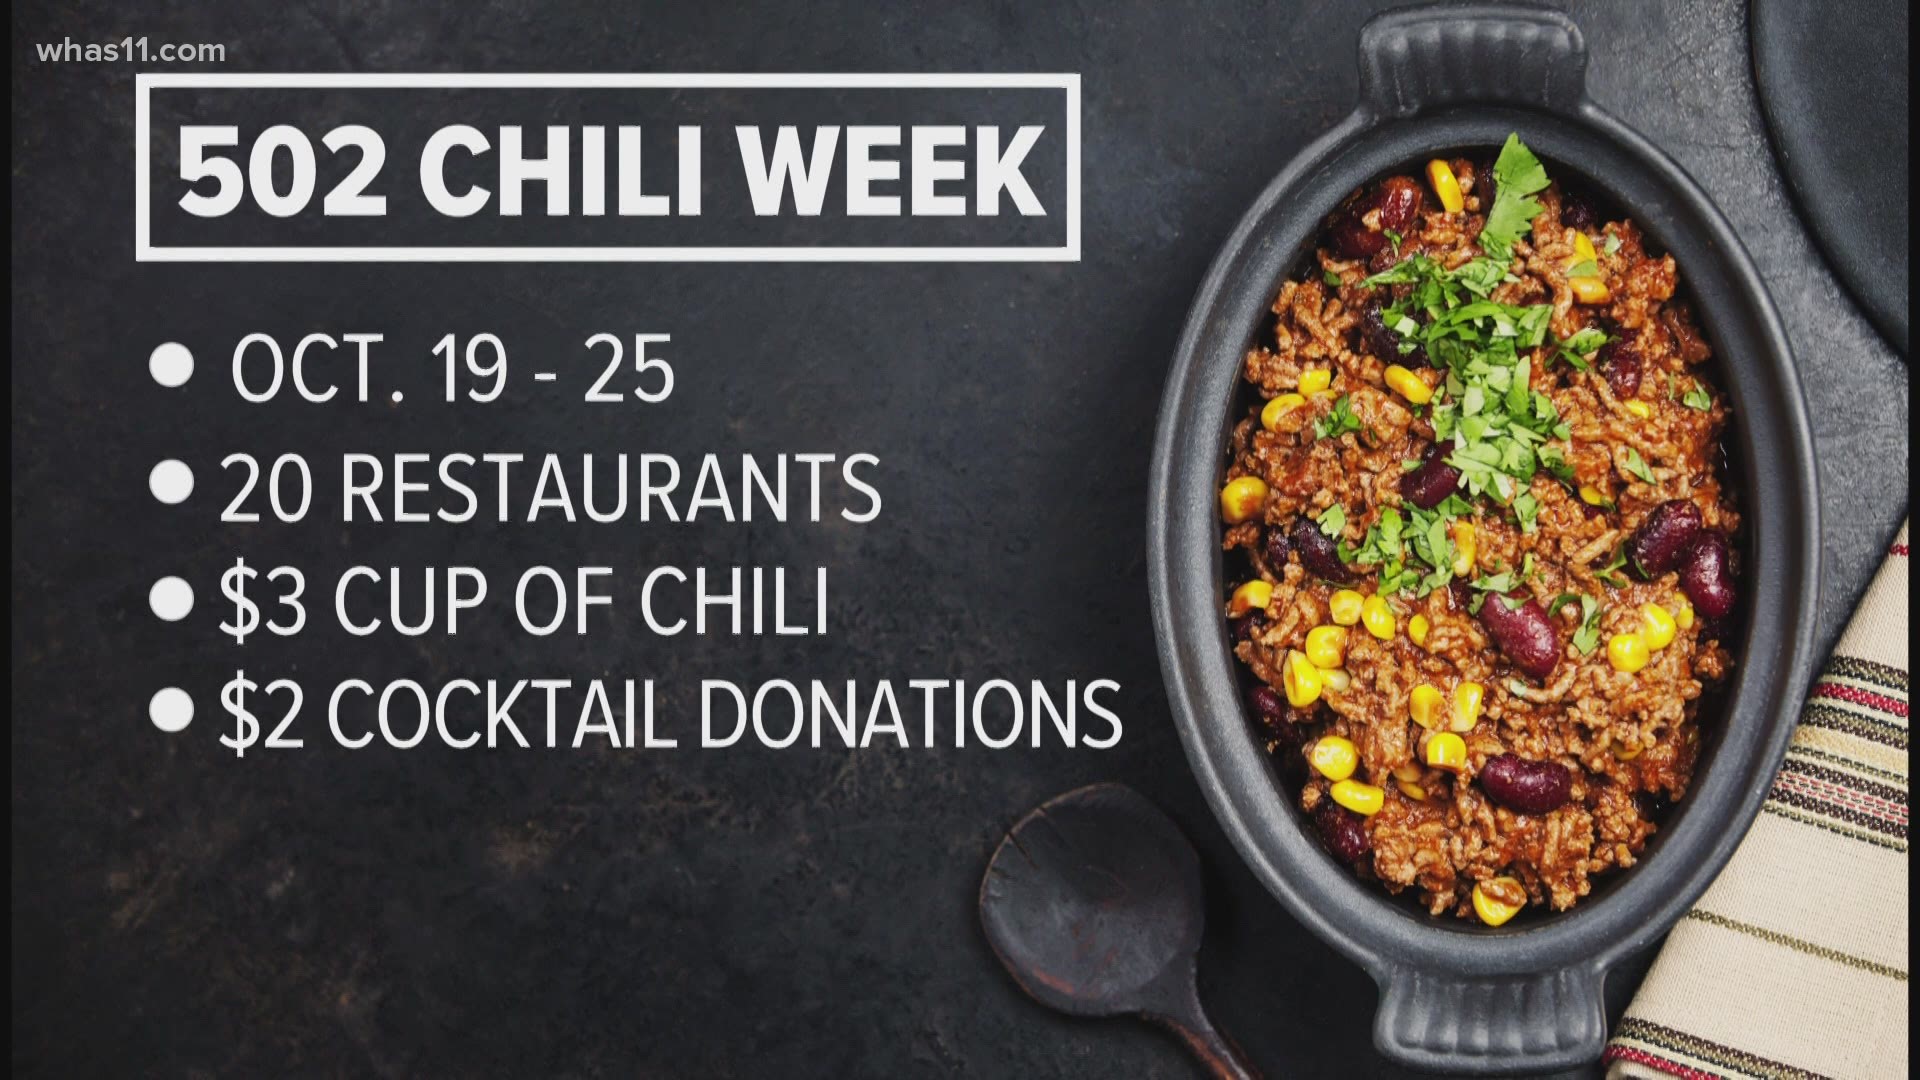 502 Chili Week in Louisville: Where to find $3 cups of chili | www.lvbagssale.com